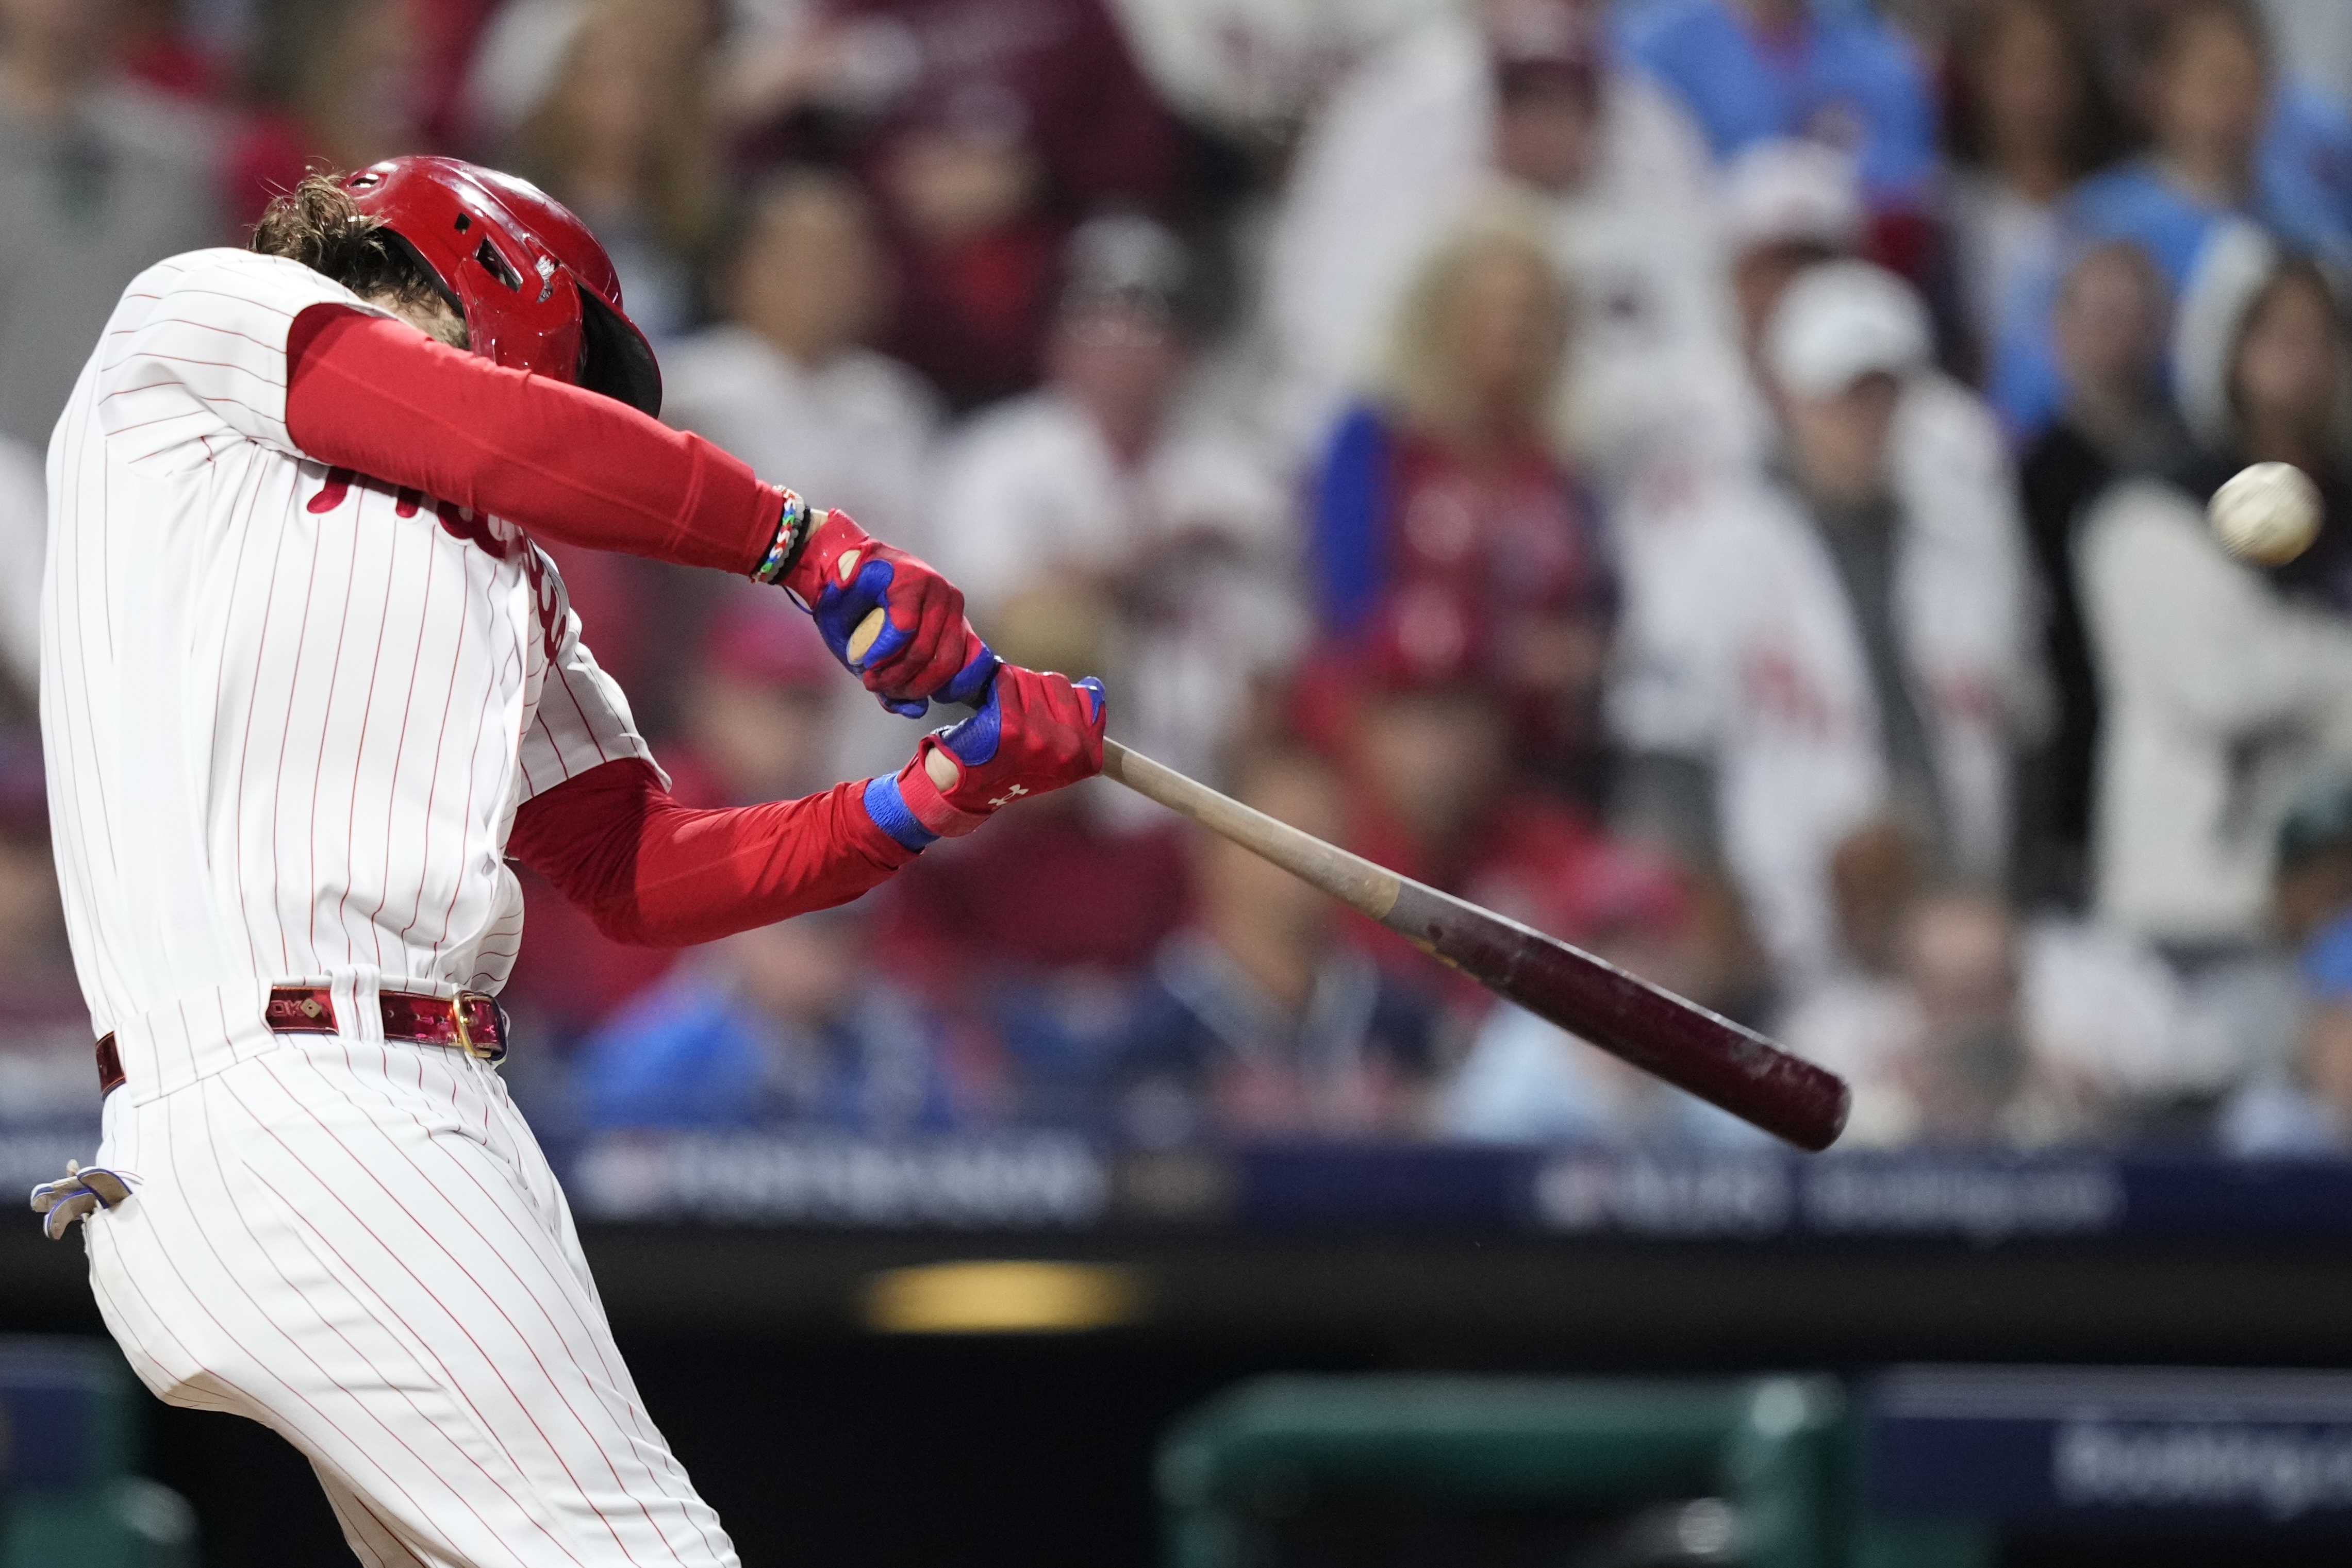 Bryce Harper hits 2 HRs as Phillies pound Braves in Game 3 of NLDS